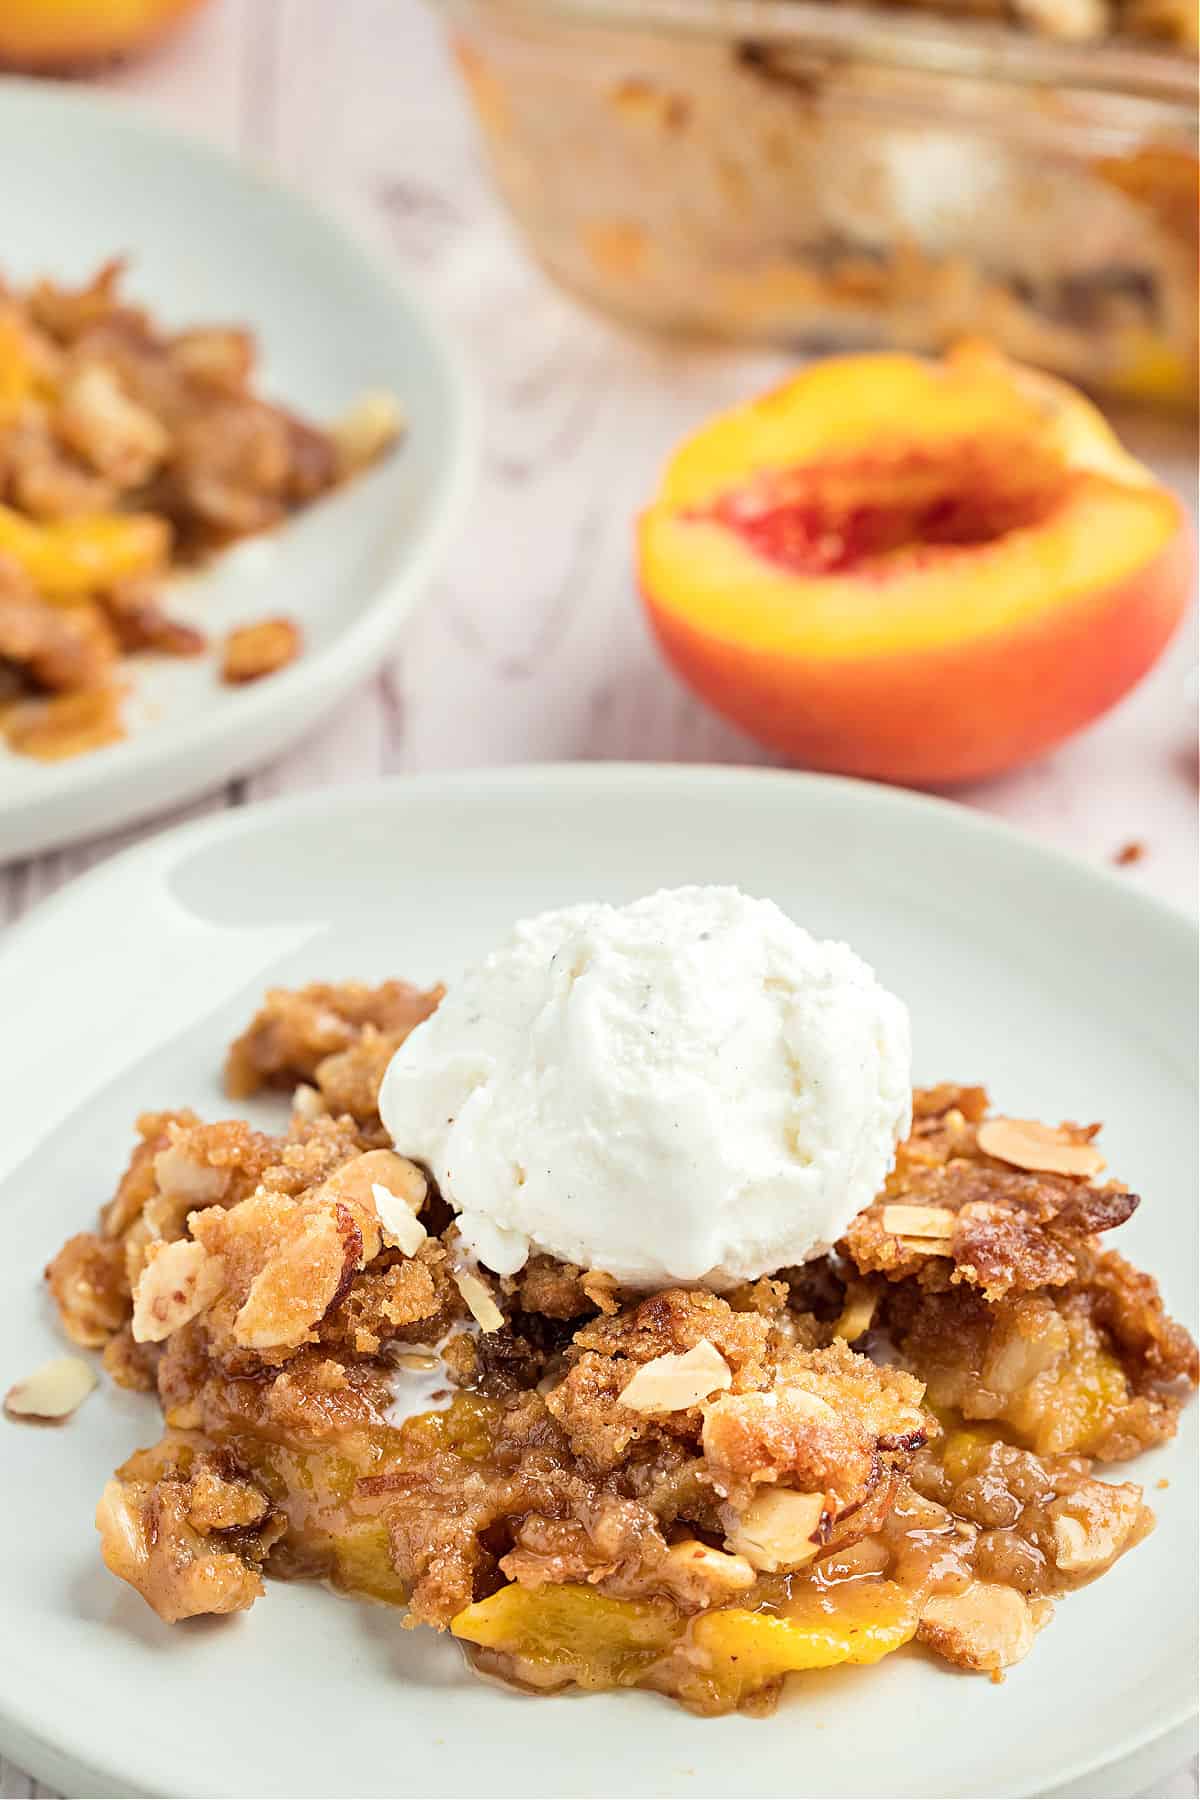 Peach crisp on a plate with a scoop of vanilla ice cream.